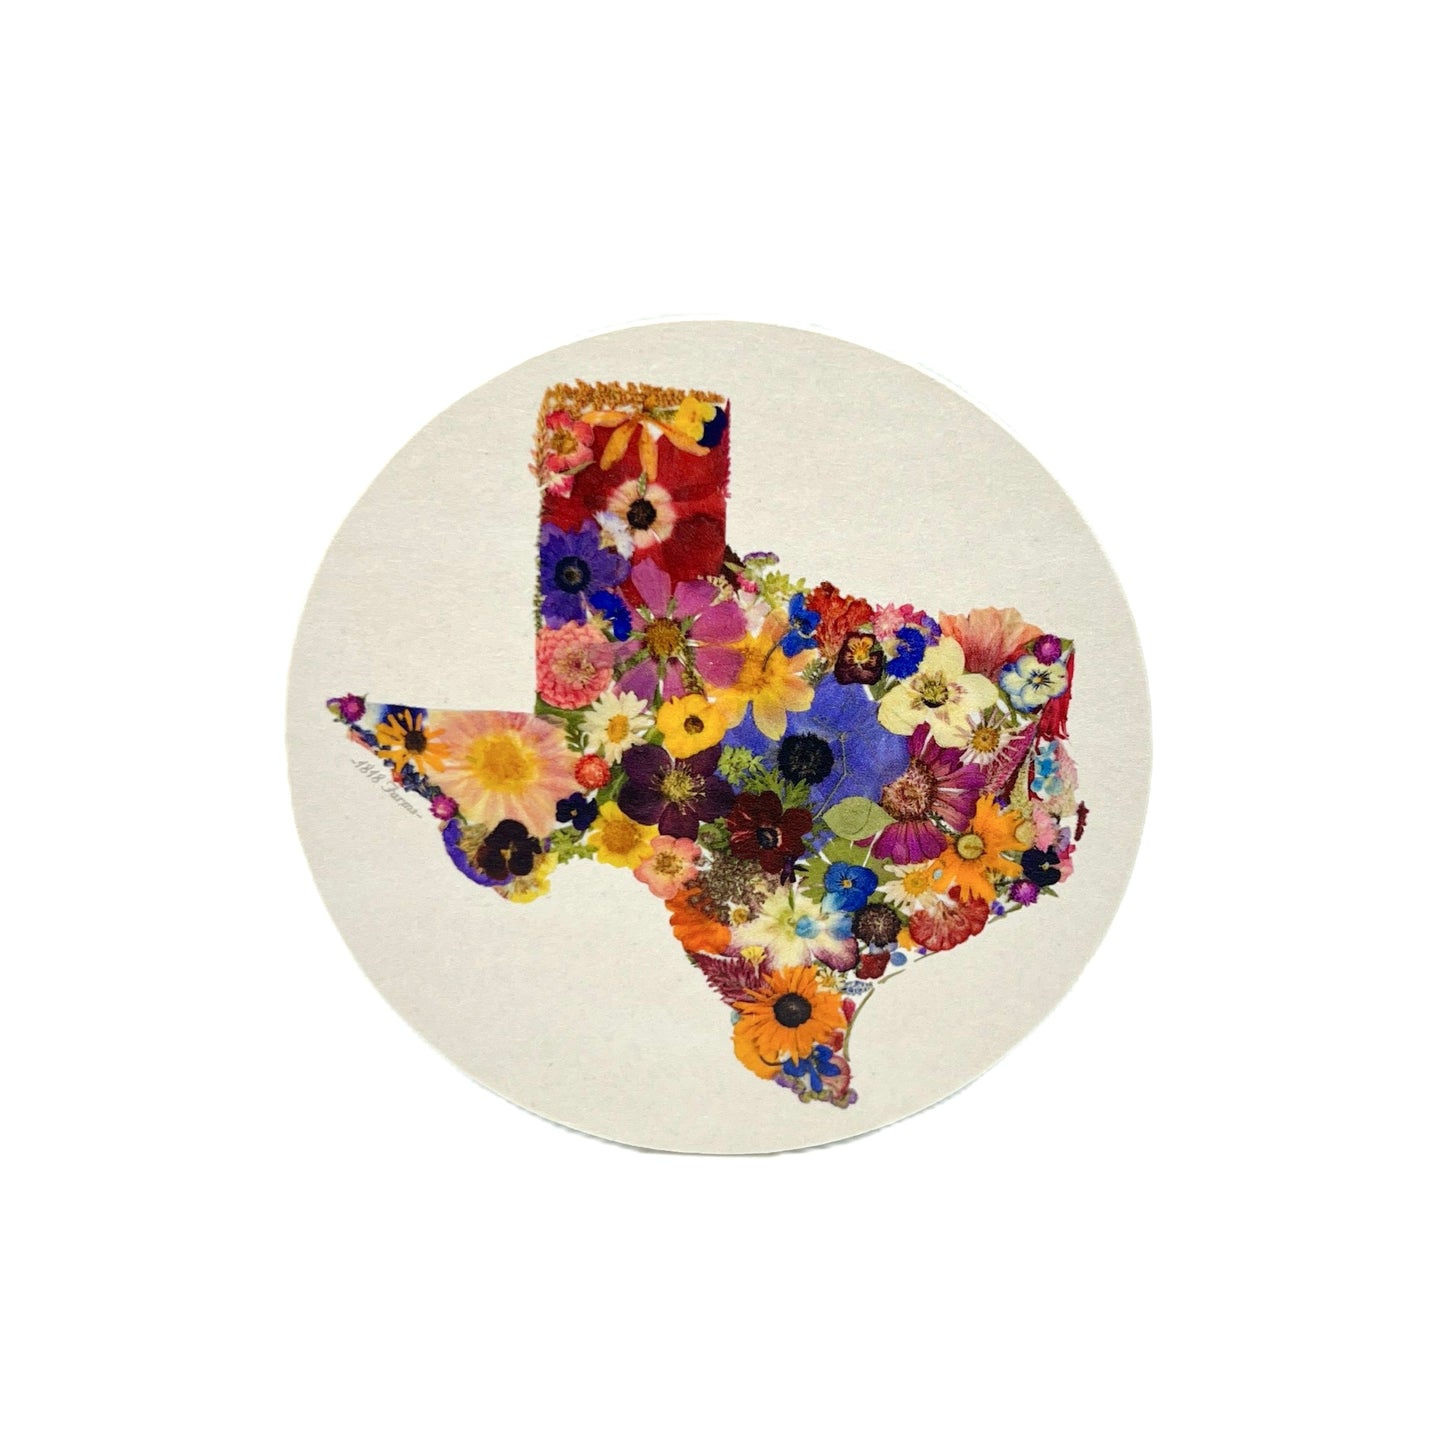 State Themed Drink Coasters (Set of 6) Featuring Dried, Pressed Flowers - "Where I Bloom" Collection Coaster 1818 Farms Texas  